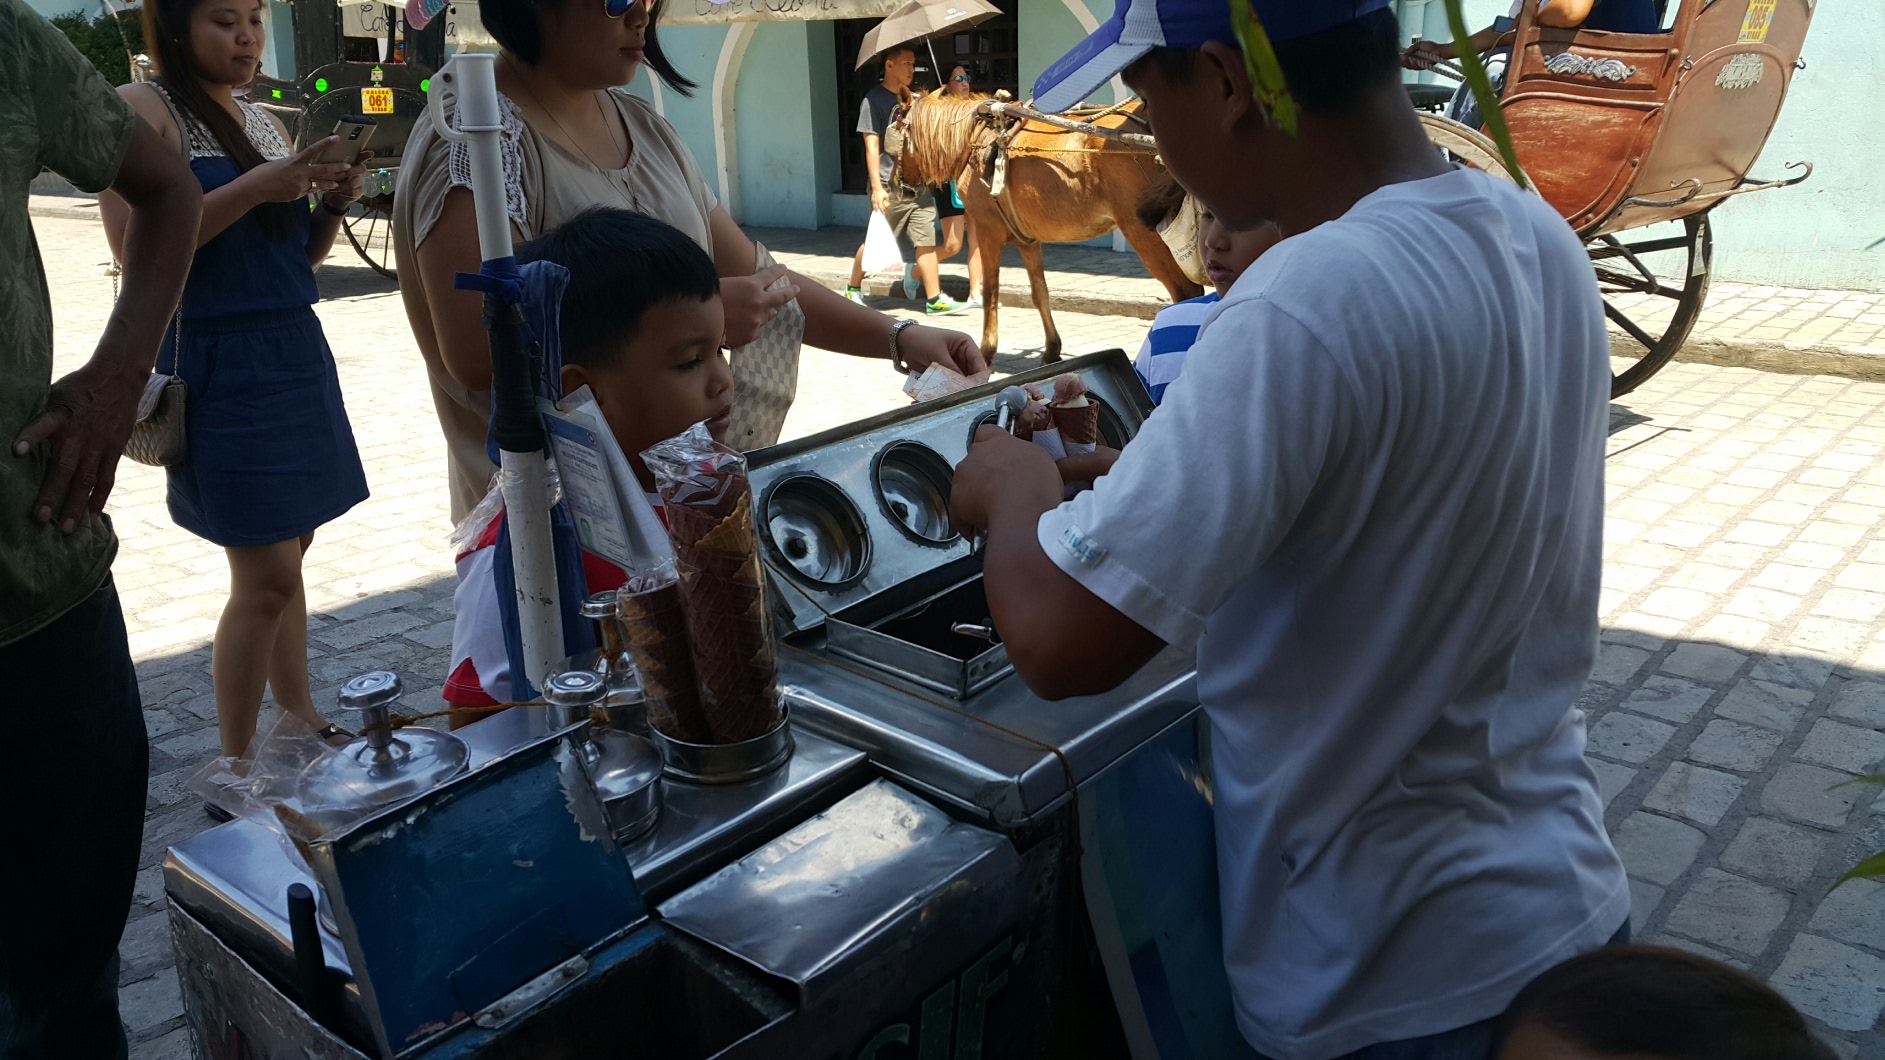 Image is mine. Ice cream being sold